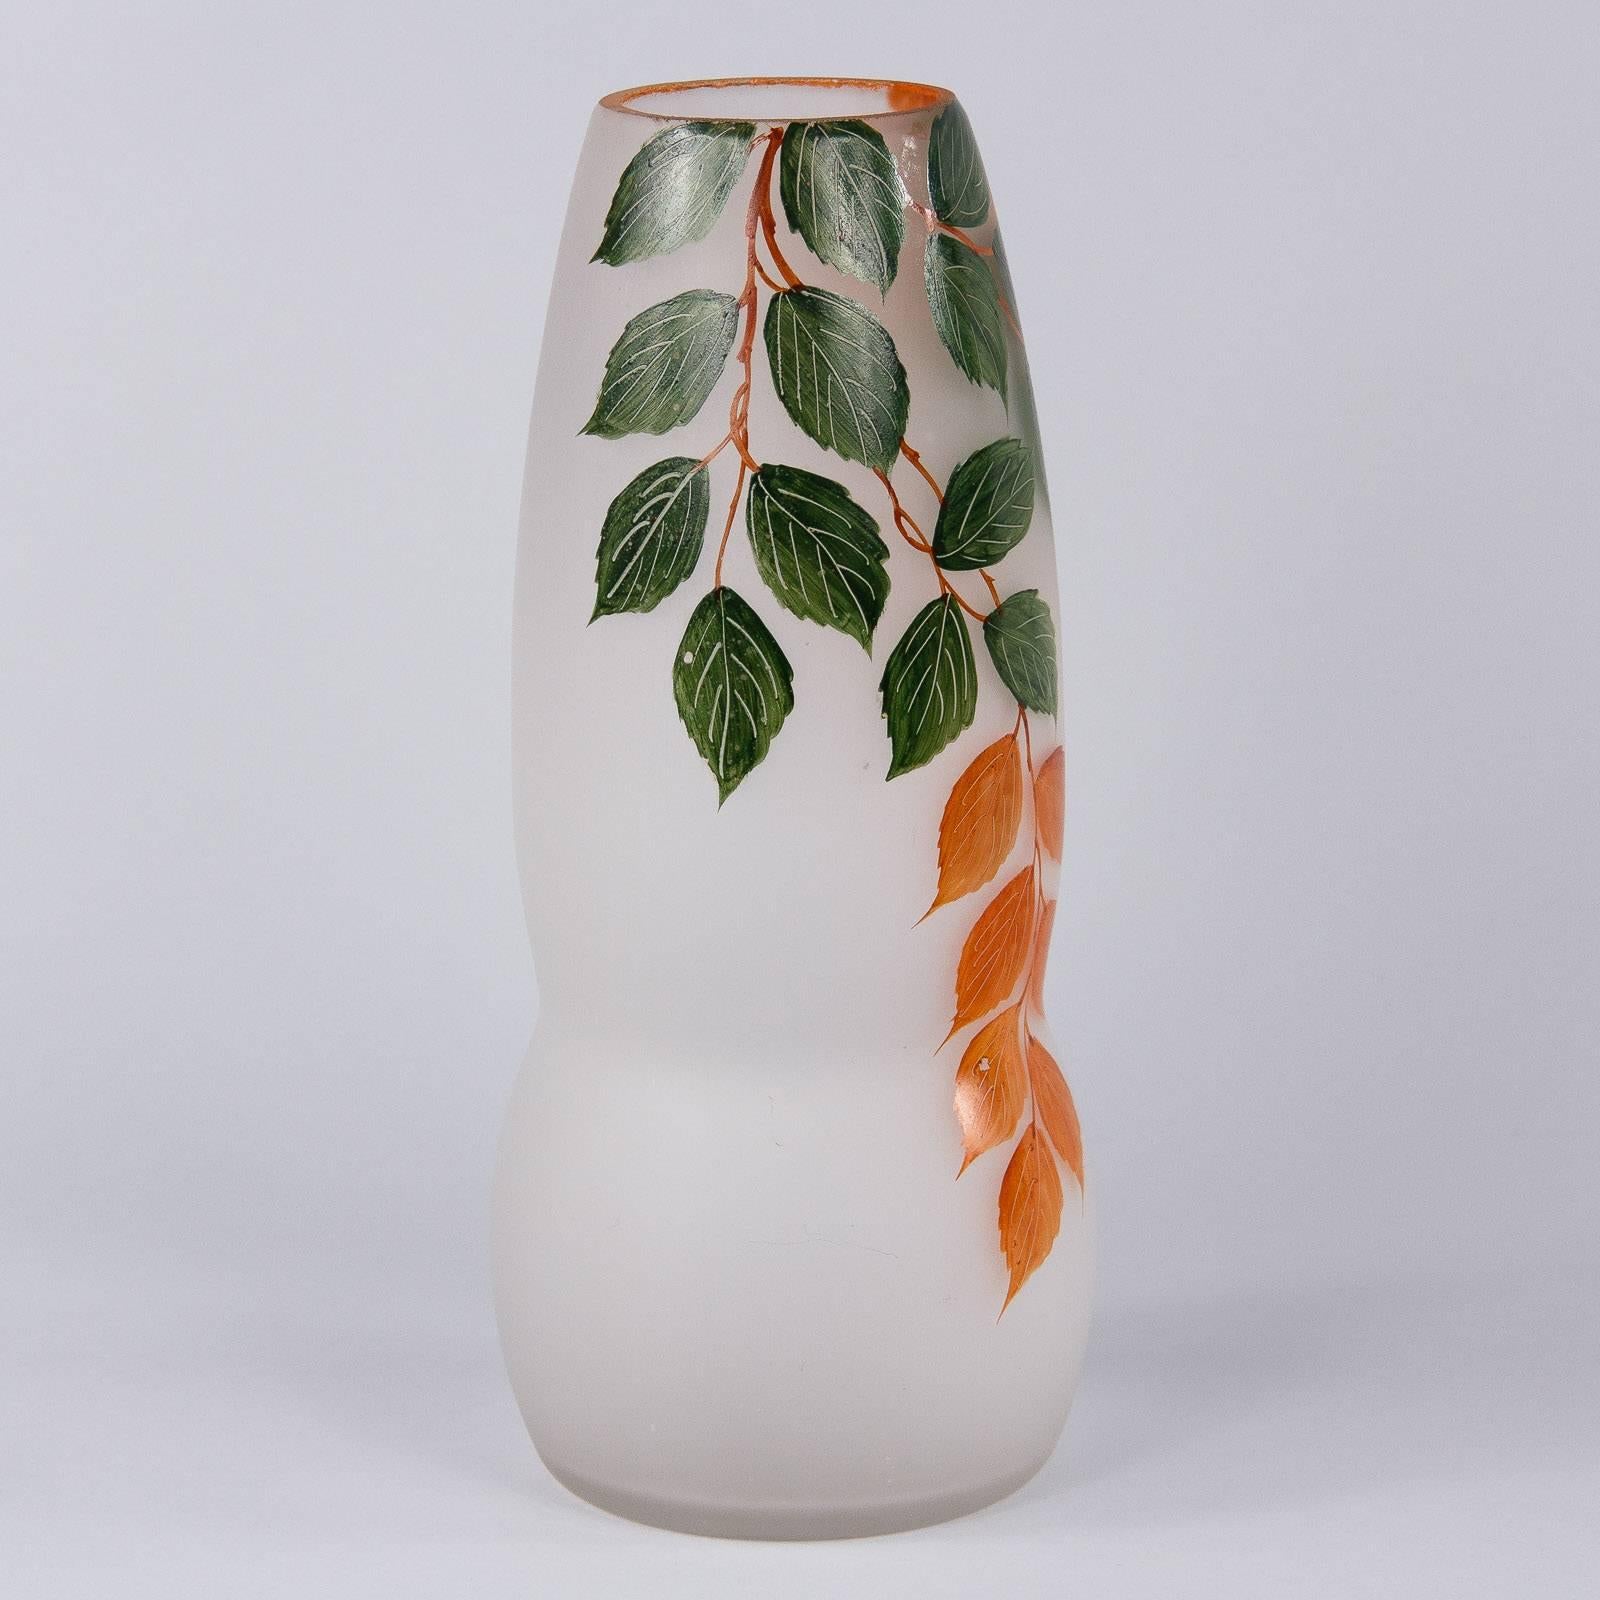 French Frosted Glass Vase with Hand Painted Foliage Motifs, 1900s For Sale 5